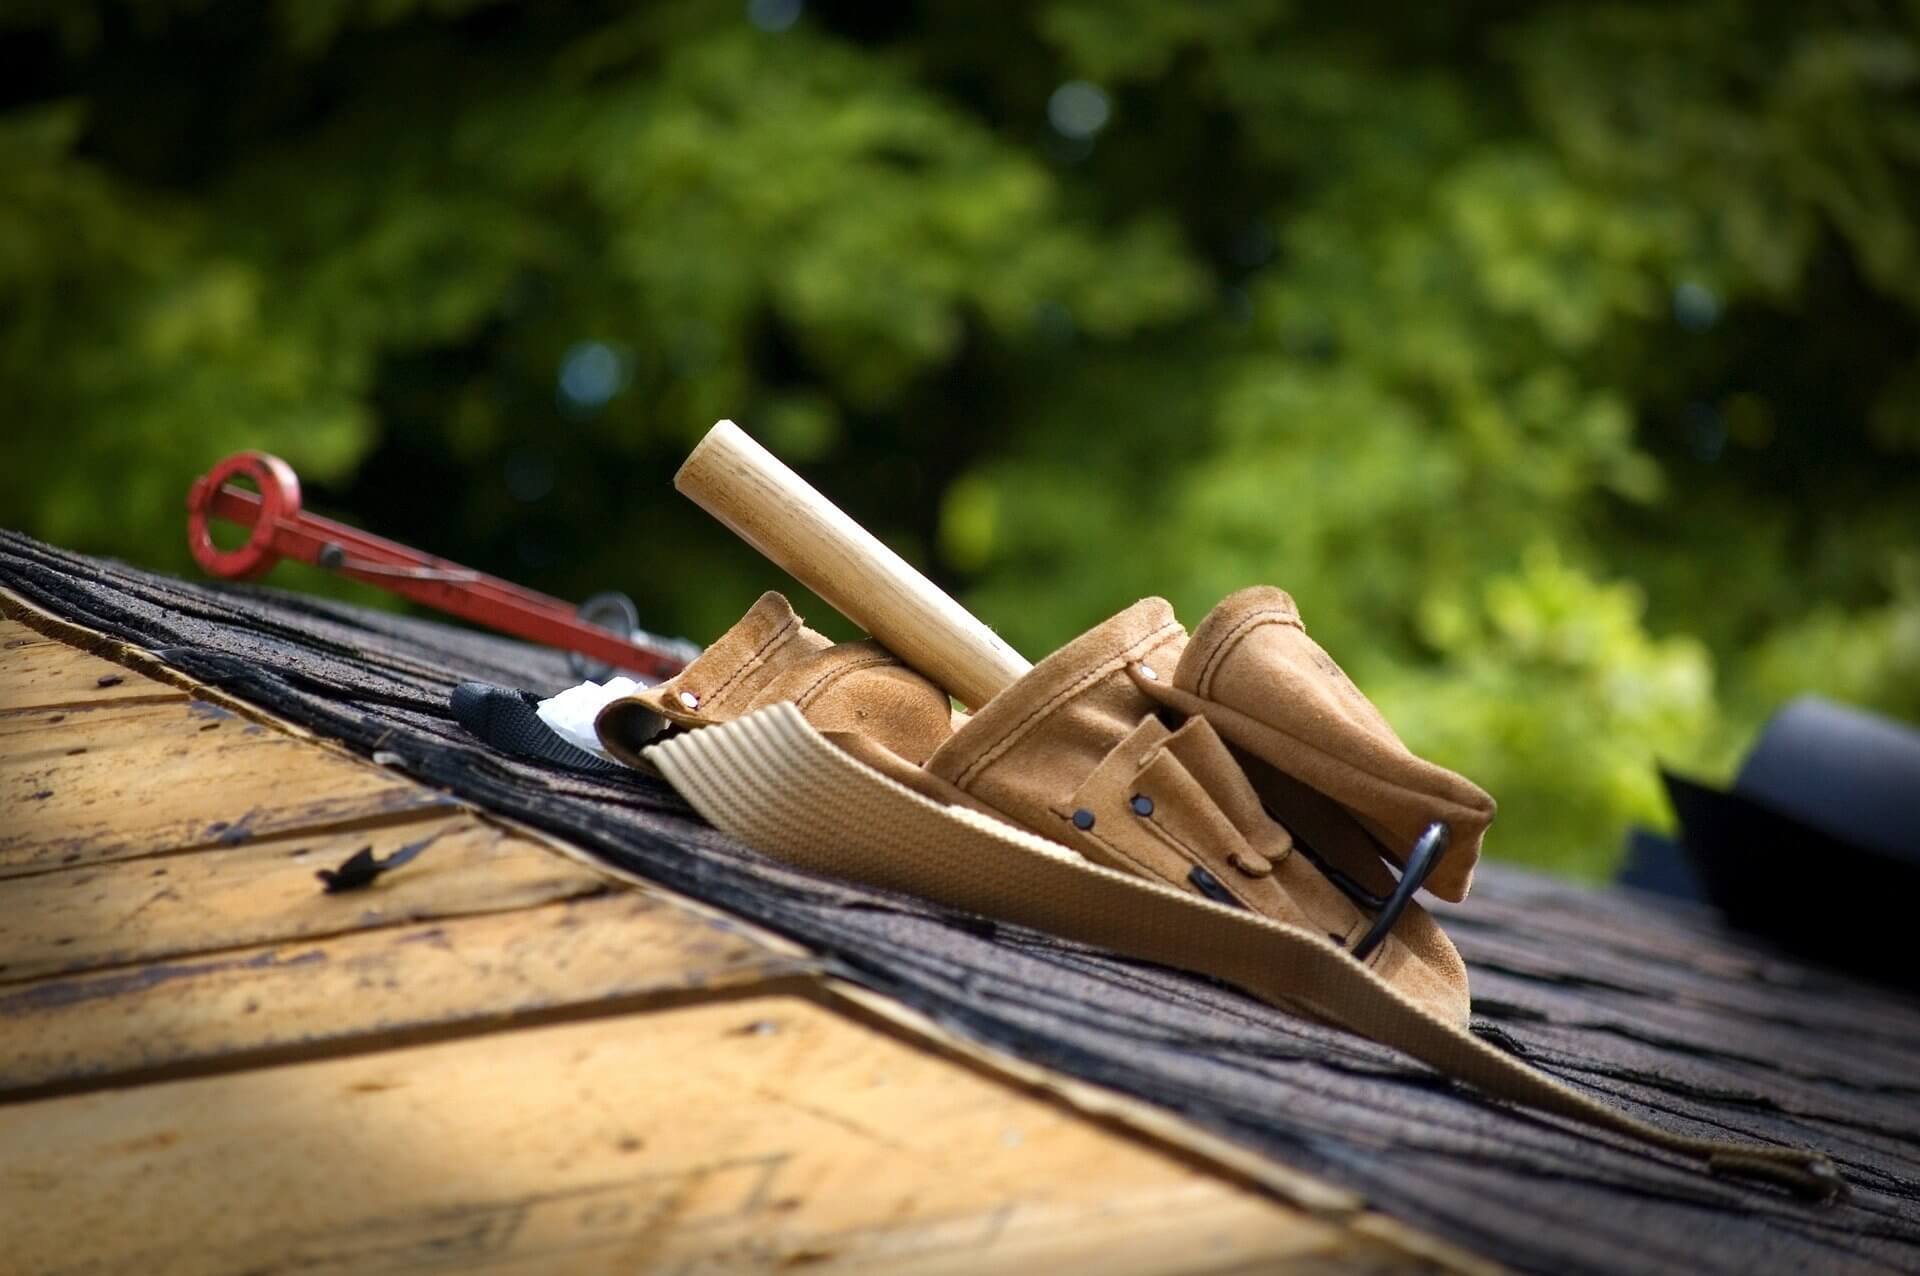 Stock image of a toolbelt on a shingled roof.